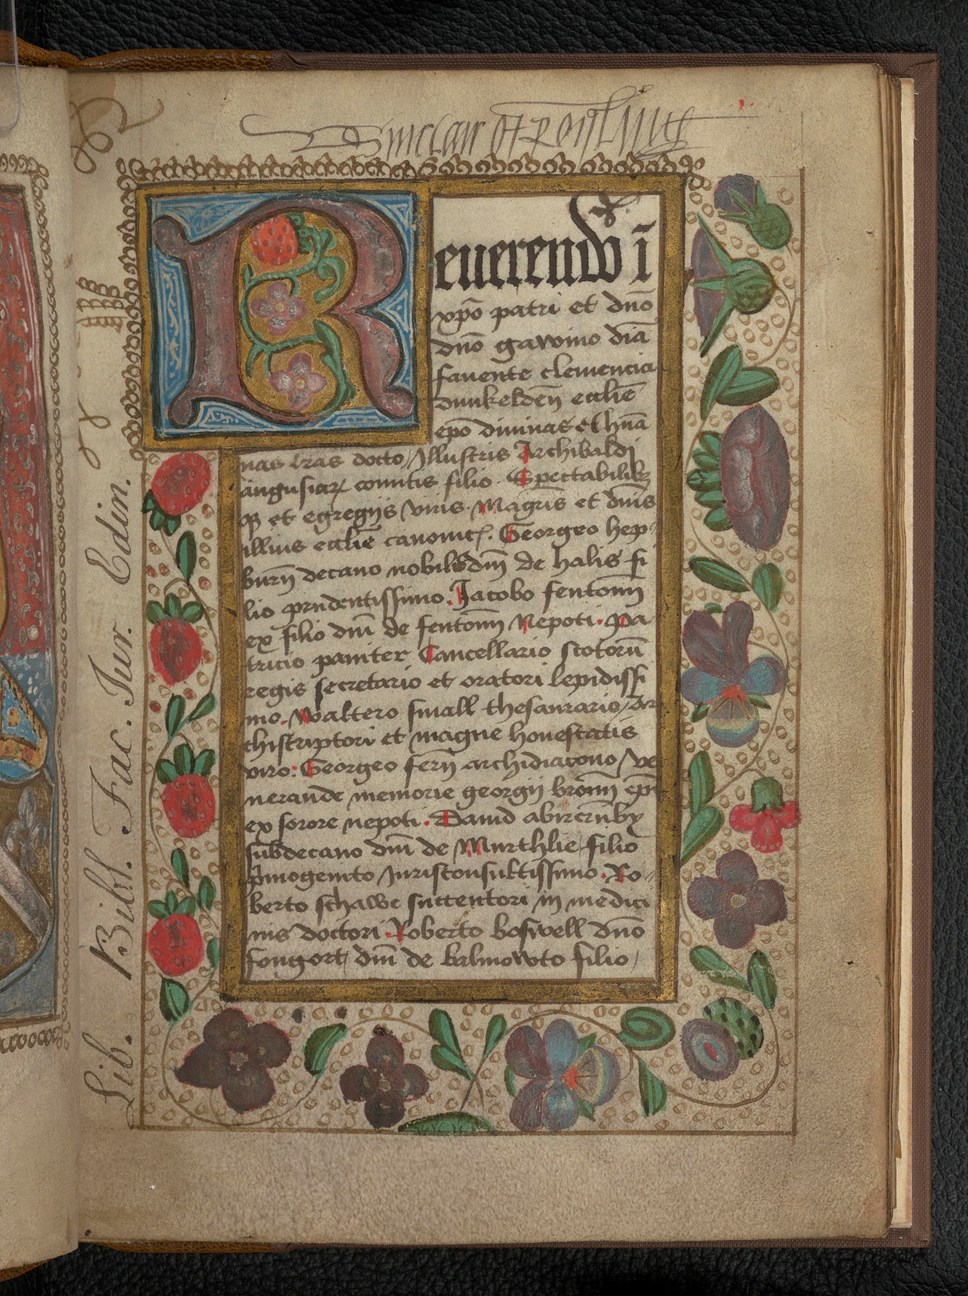 An early 16th-century manuscript of Abbot Alexander Myln's 'Lives of the bishops of Dunkeld', written and illuminated in Dunkeld. Strawberries, flowers, a large initial and a golden frame surround the dedication of the work to Gavin Douglas, poet and bishop of Dunkeld.